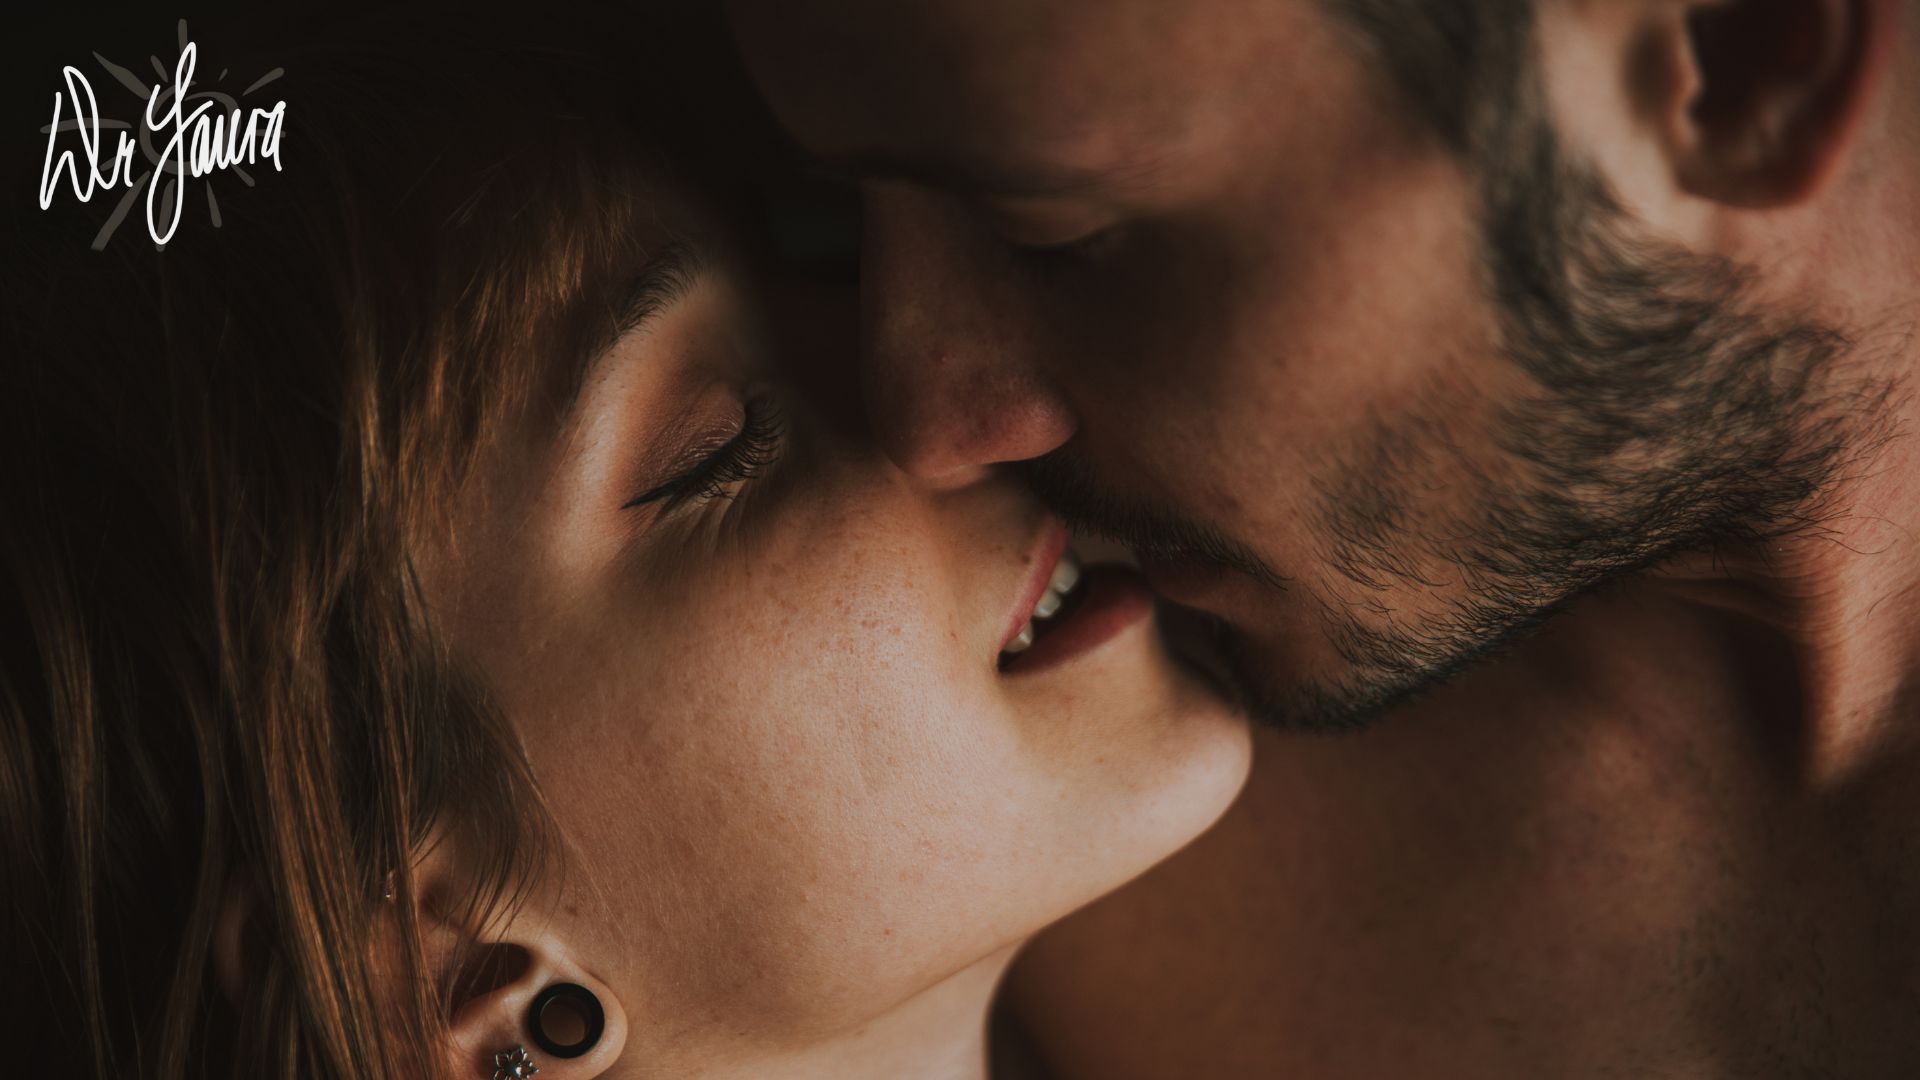 Woman with closed eyes kisses man with closed eyes